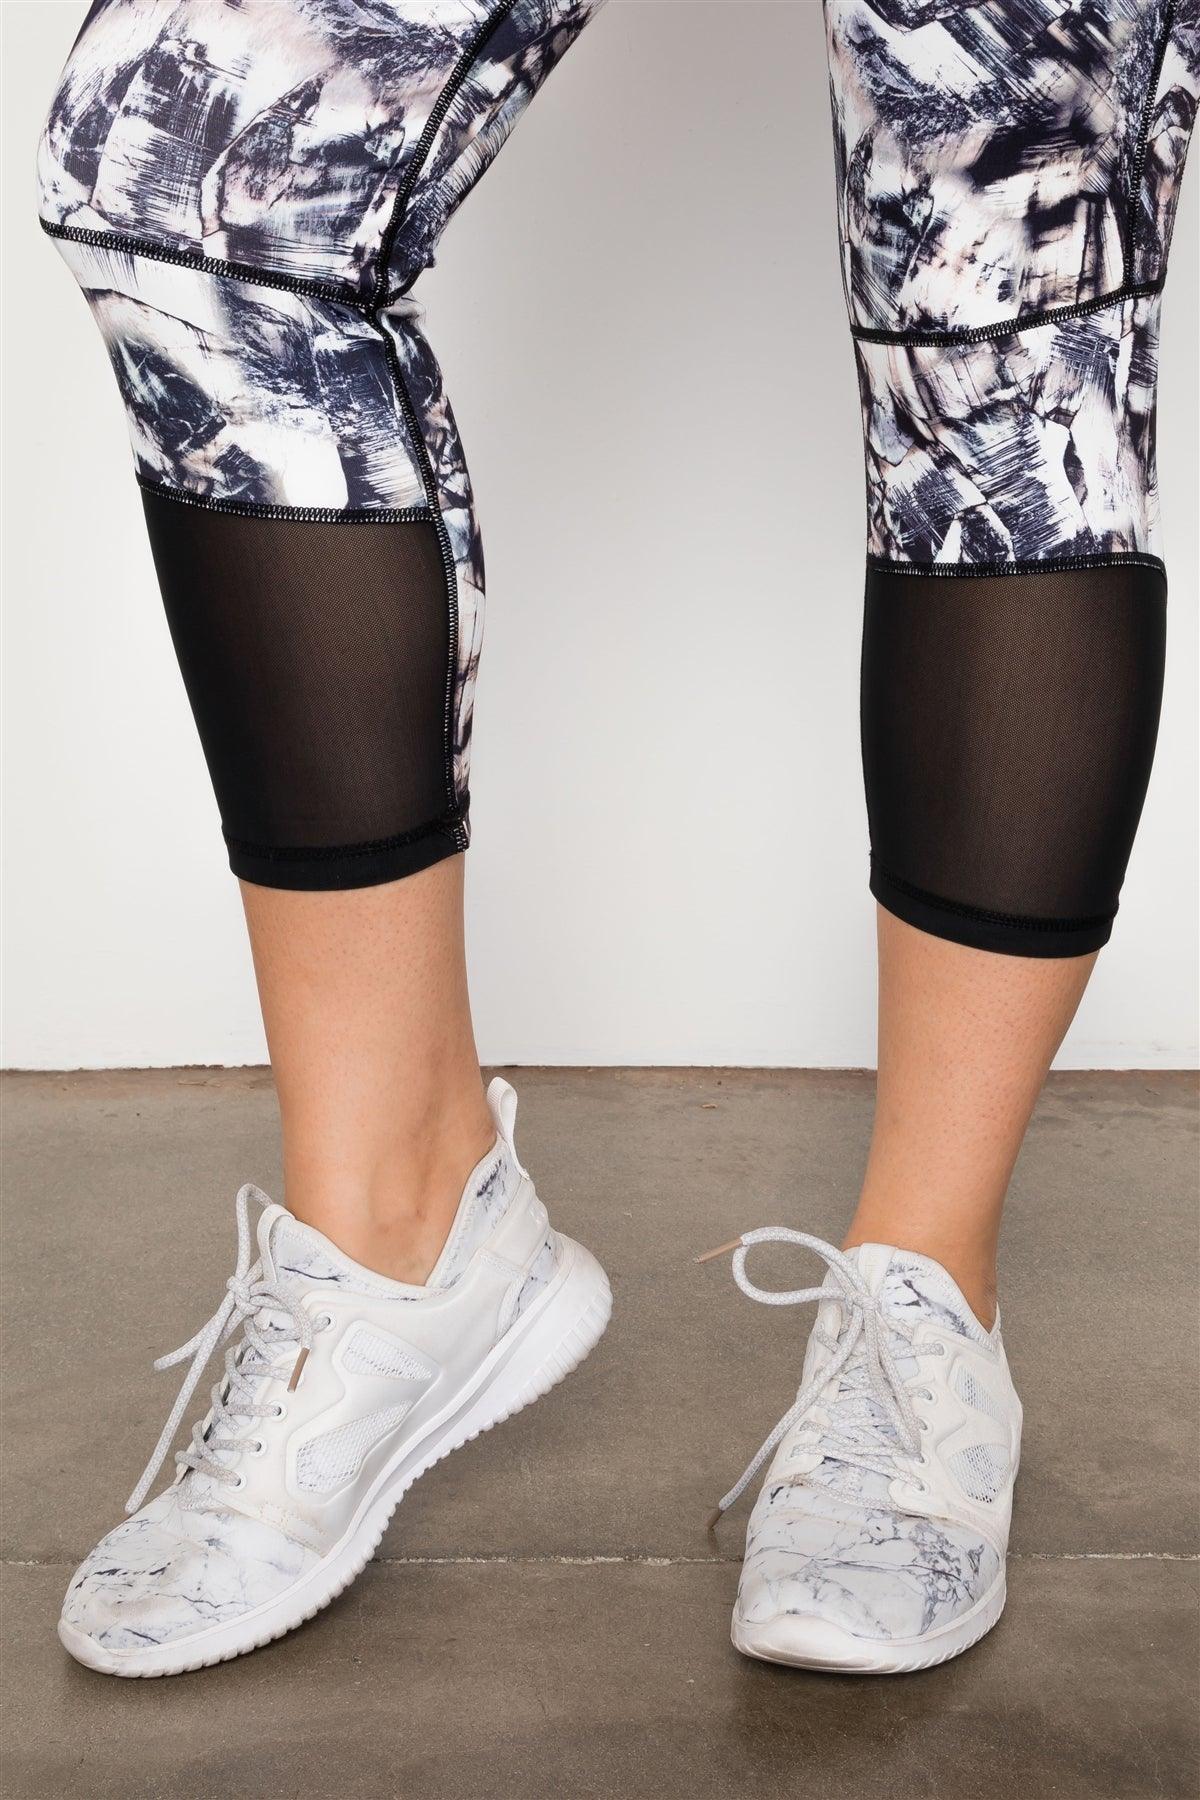 Plus Size Active Athletic Mid Rise Abstract Leggings /3-3